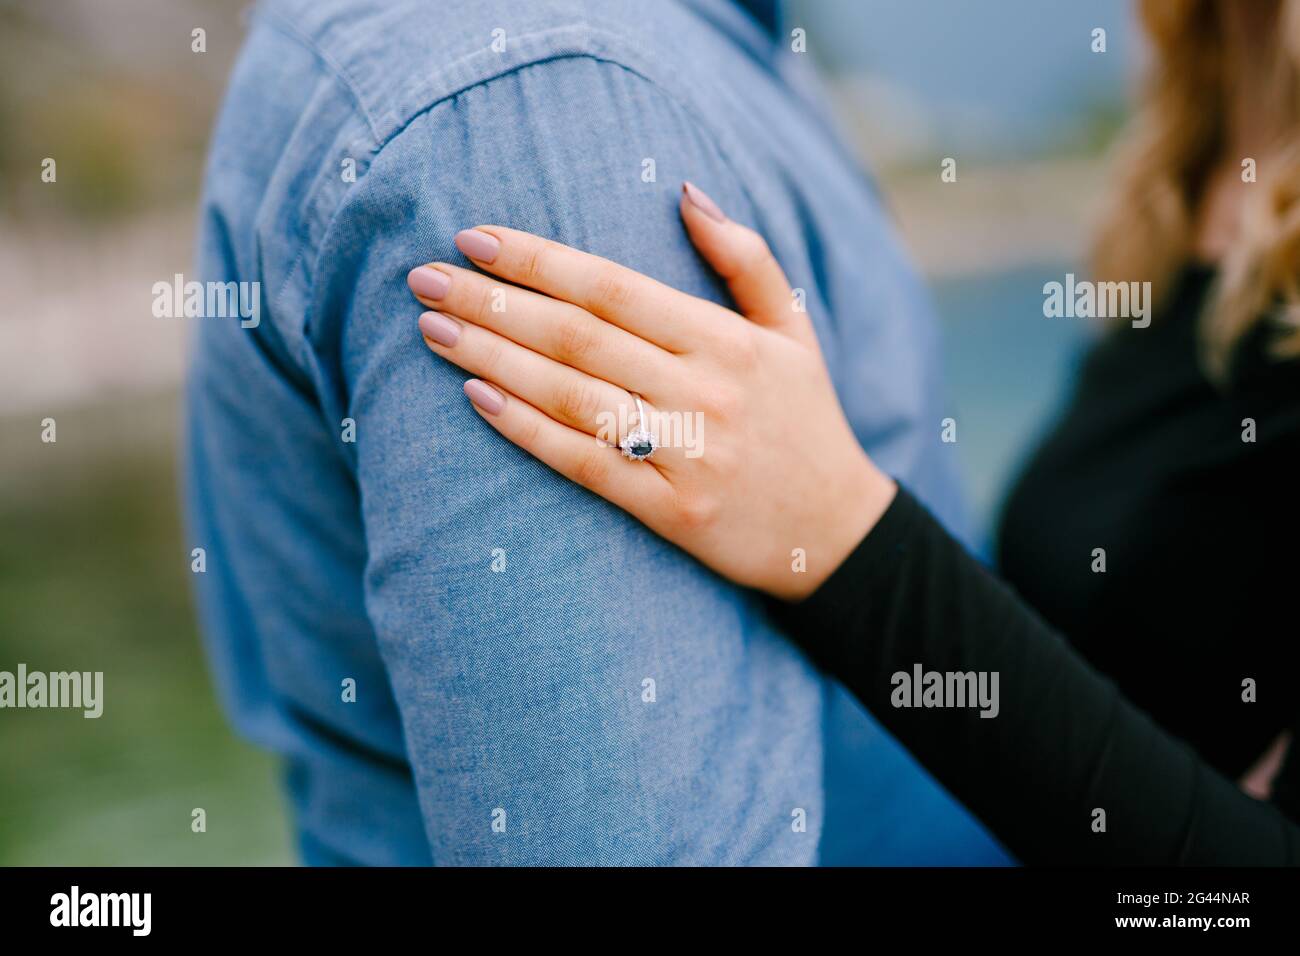 Girl put her hand with a ring on the man's shoulder. Close up Stock Photo